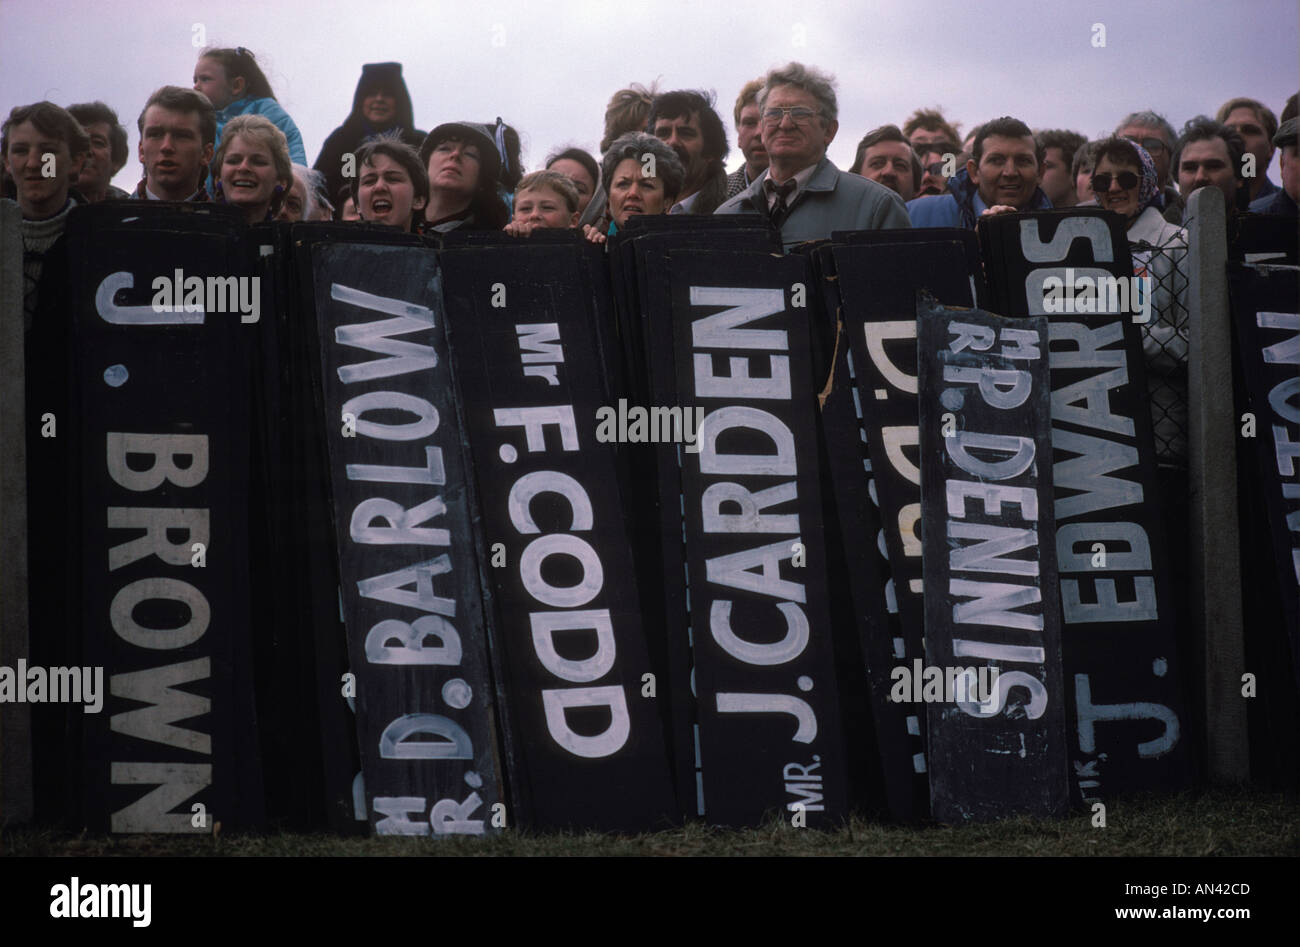 Aintree Grand National horse race 1980s. Spectators line up behind the jockeys name boards 80s UK HOMER SYKES Stock Photo